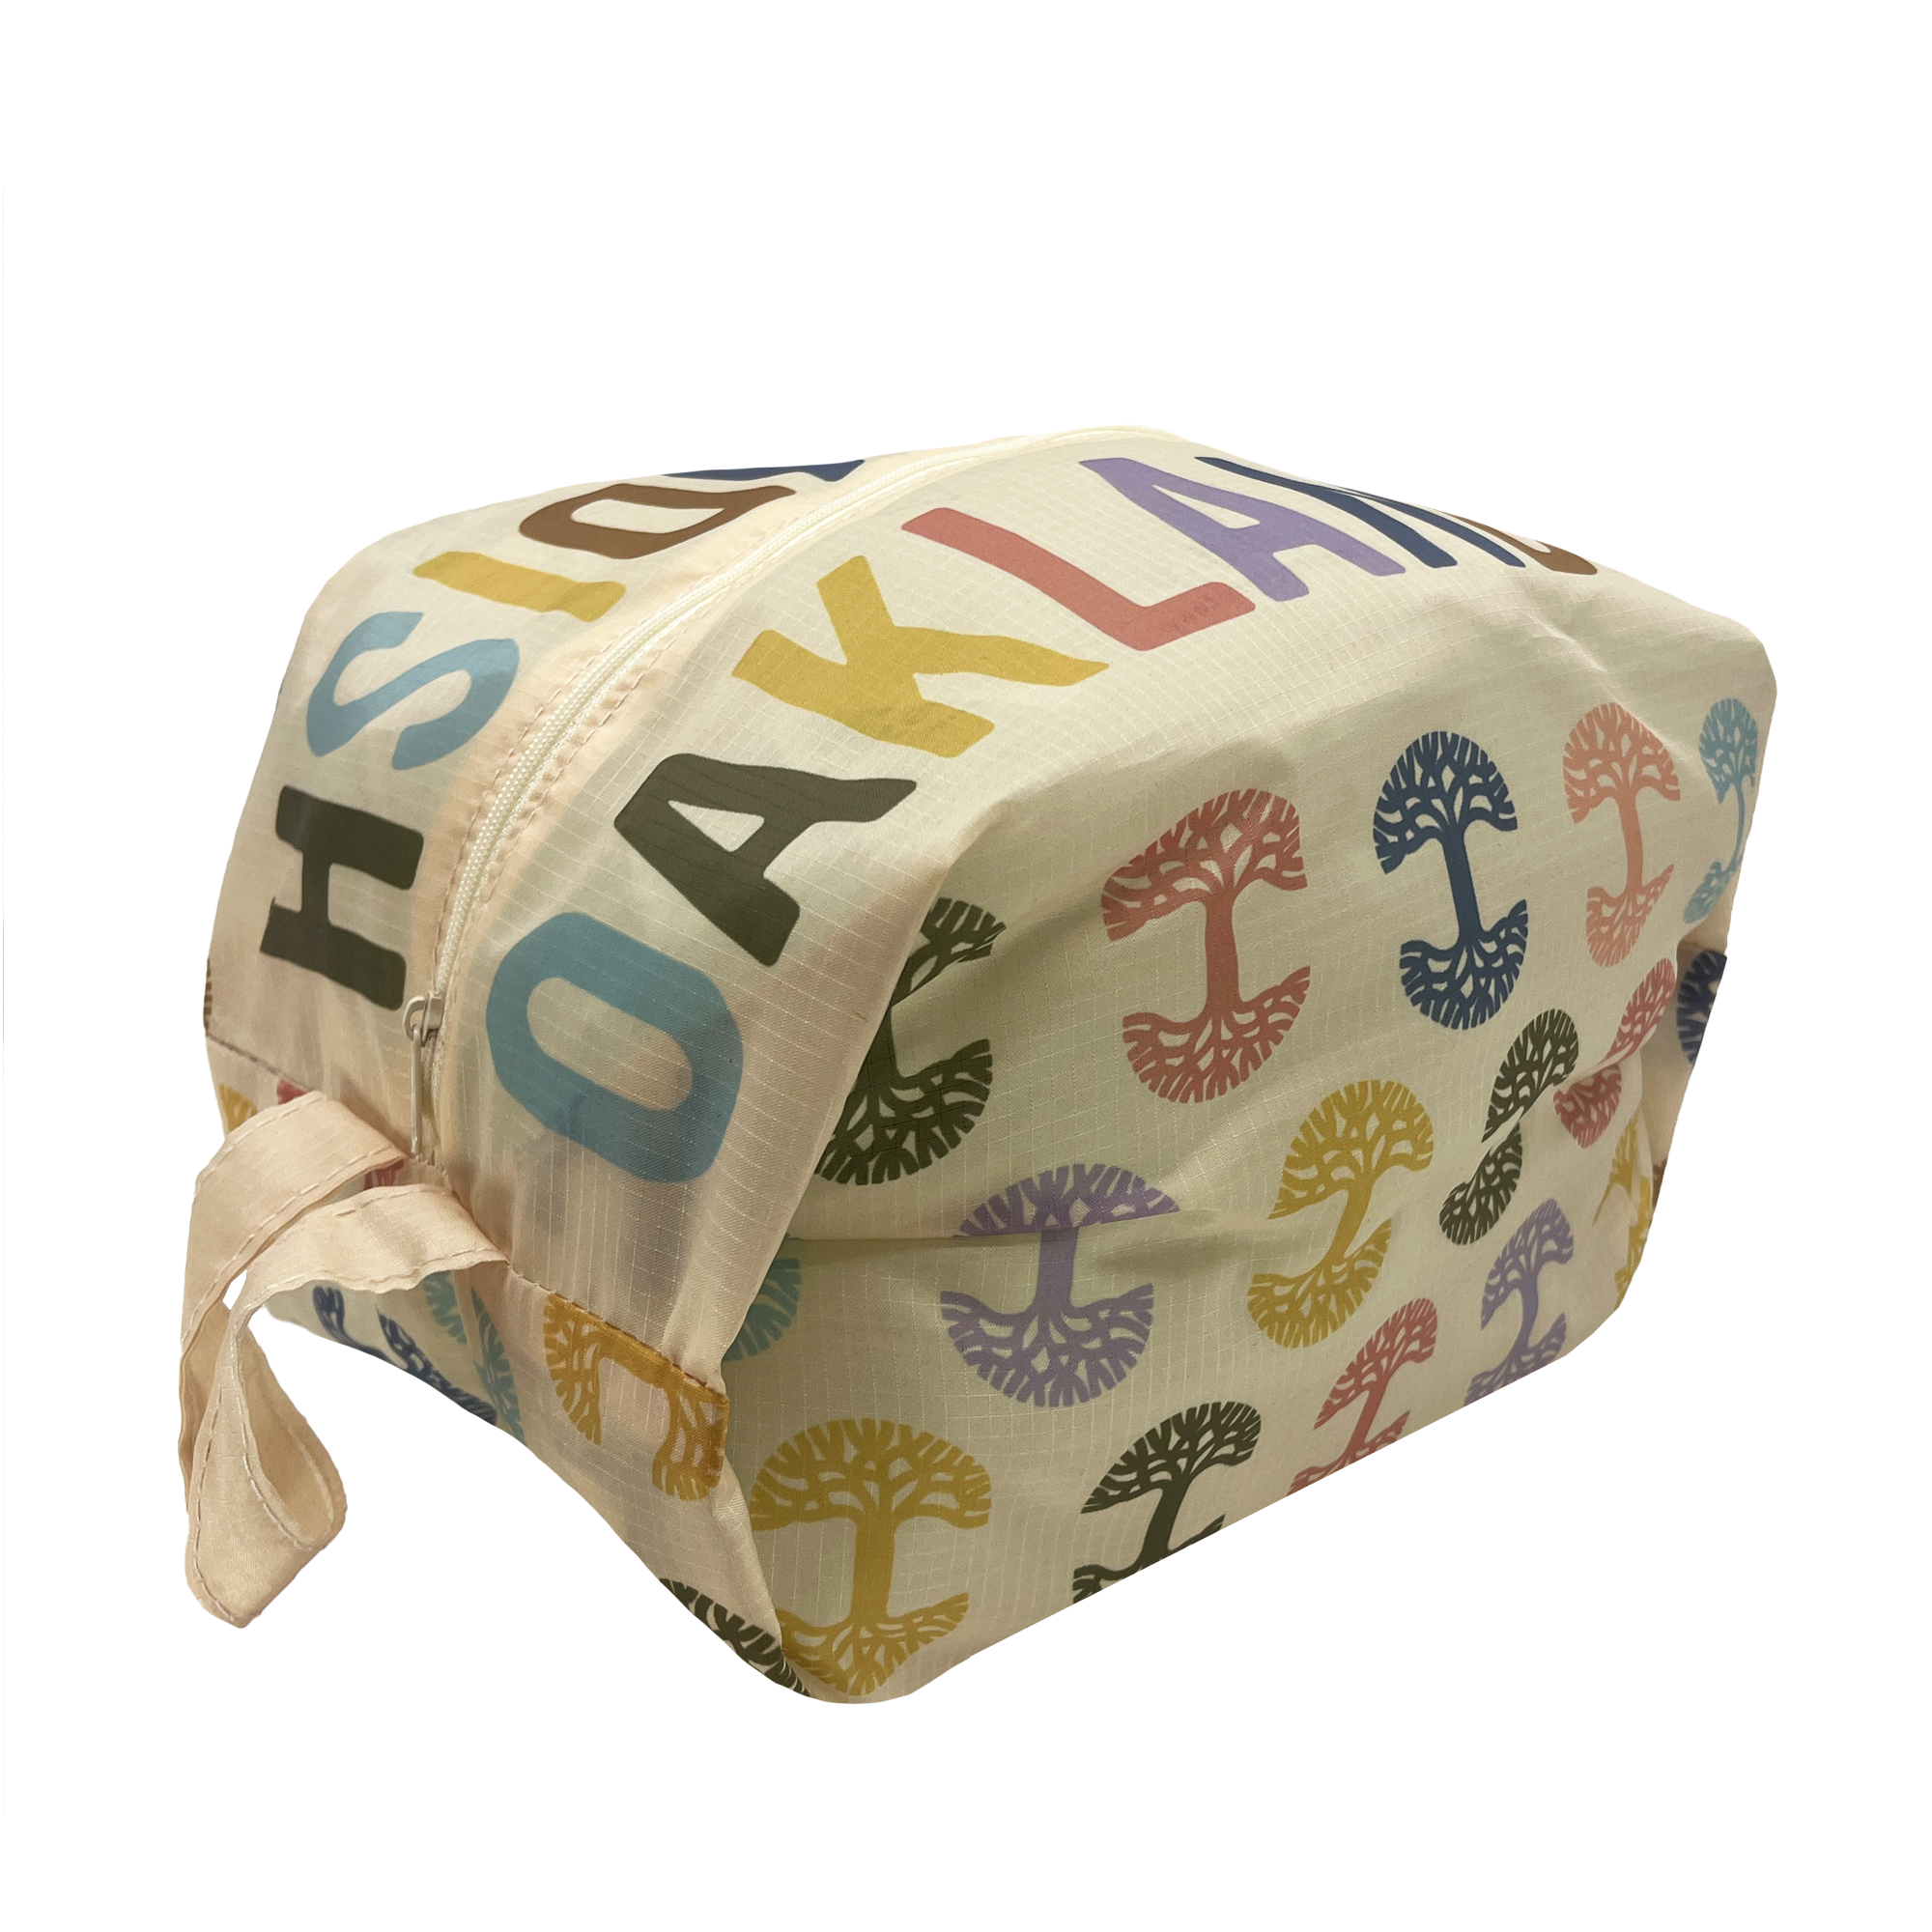 Above and side-angle view of a natural cream colored zippered toiletry dopp bag with multi-color Oaklandish tree logos on repeat and Oaklandish wordmarks on the top.